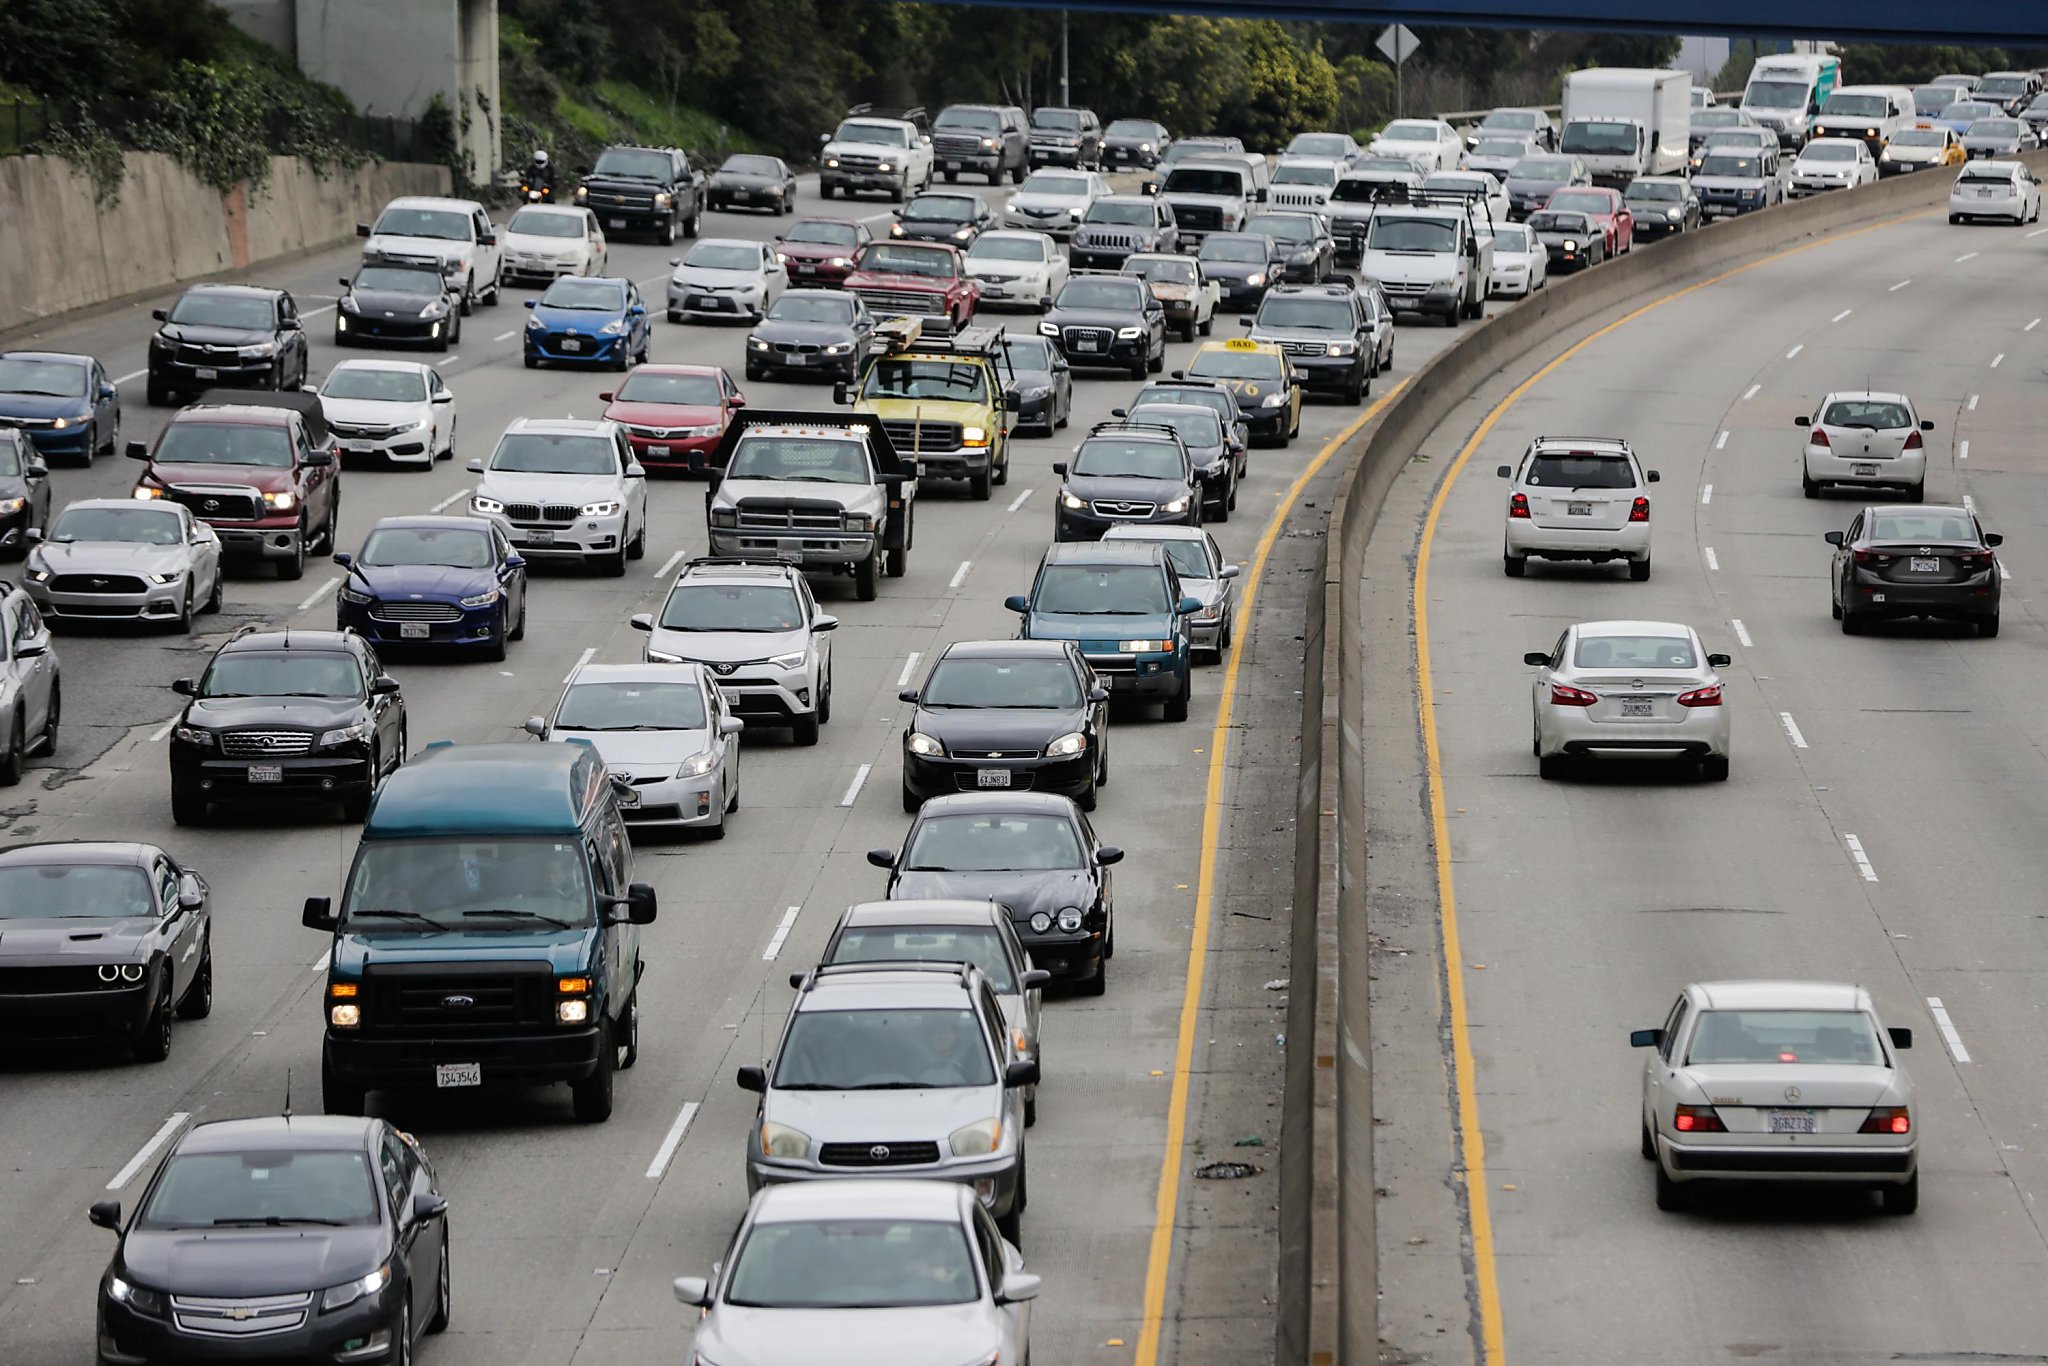 'Complacency' sends traffic deaths soaring in California and US - SFGate